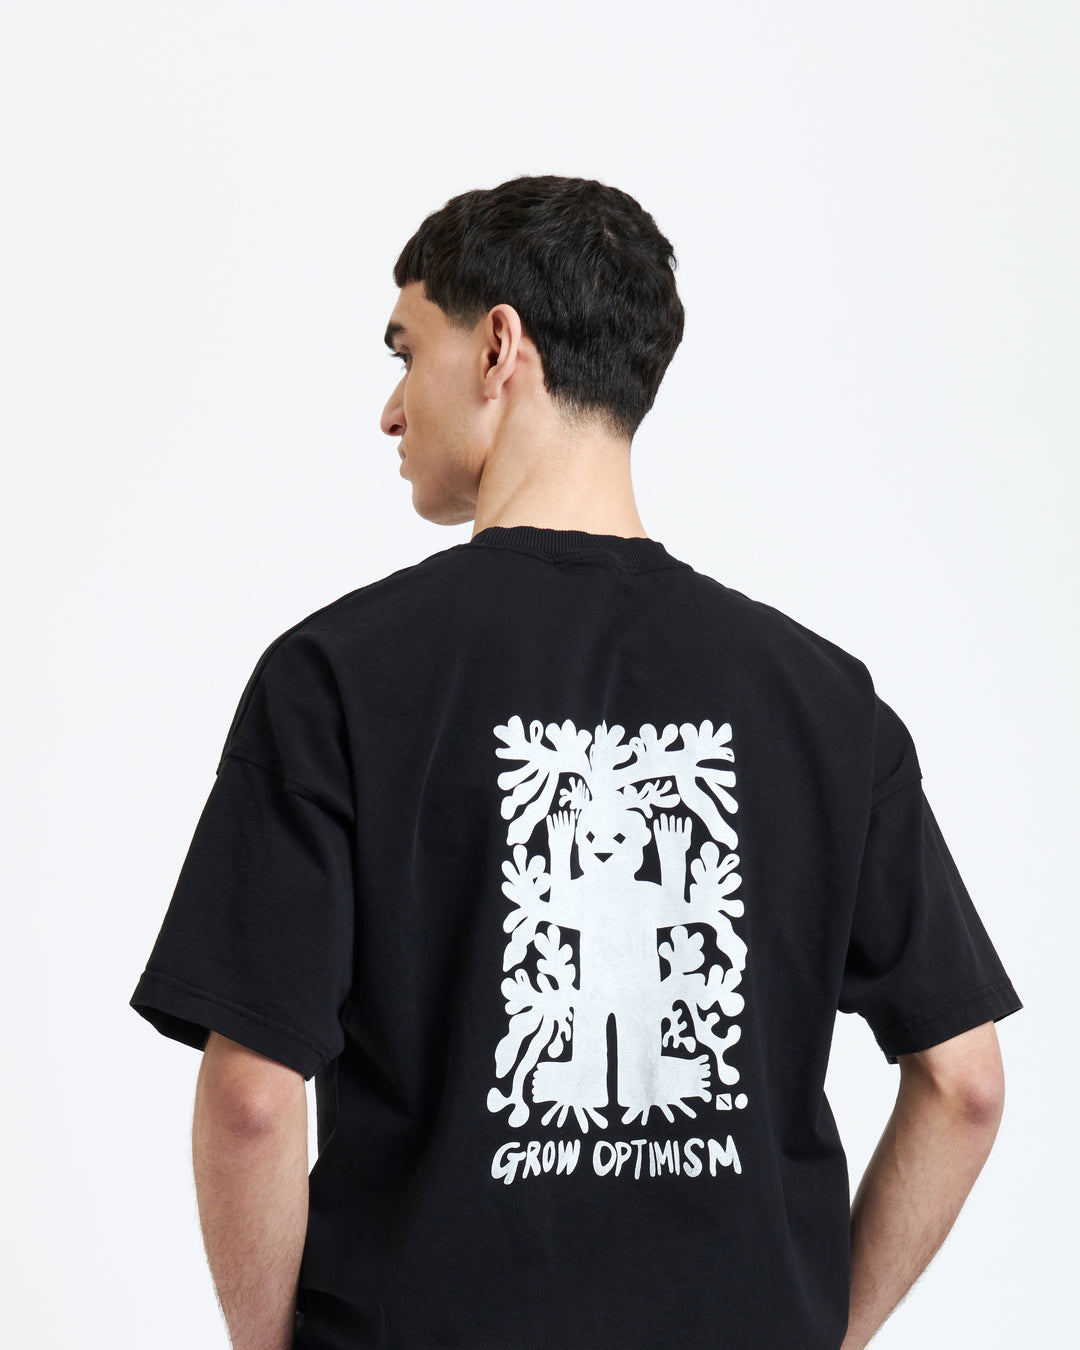 New Optimist menswear Spiaggia | Relaxed T-shirt 'Grow Optimism' T-shirt